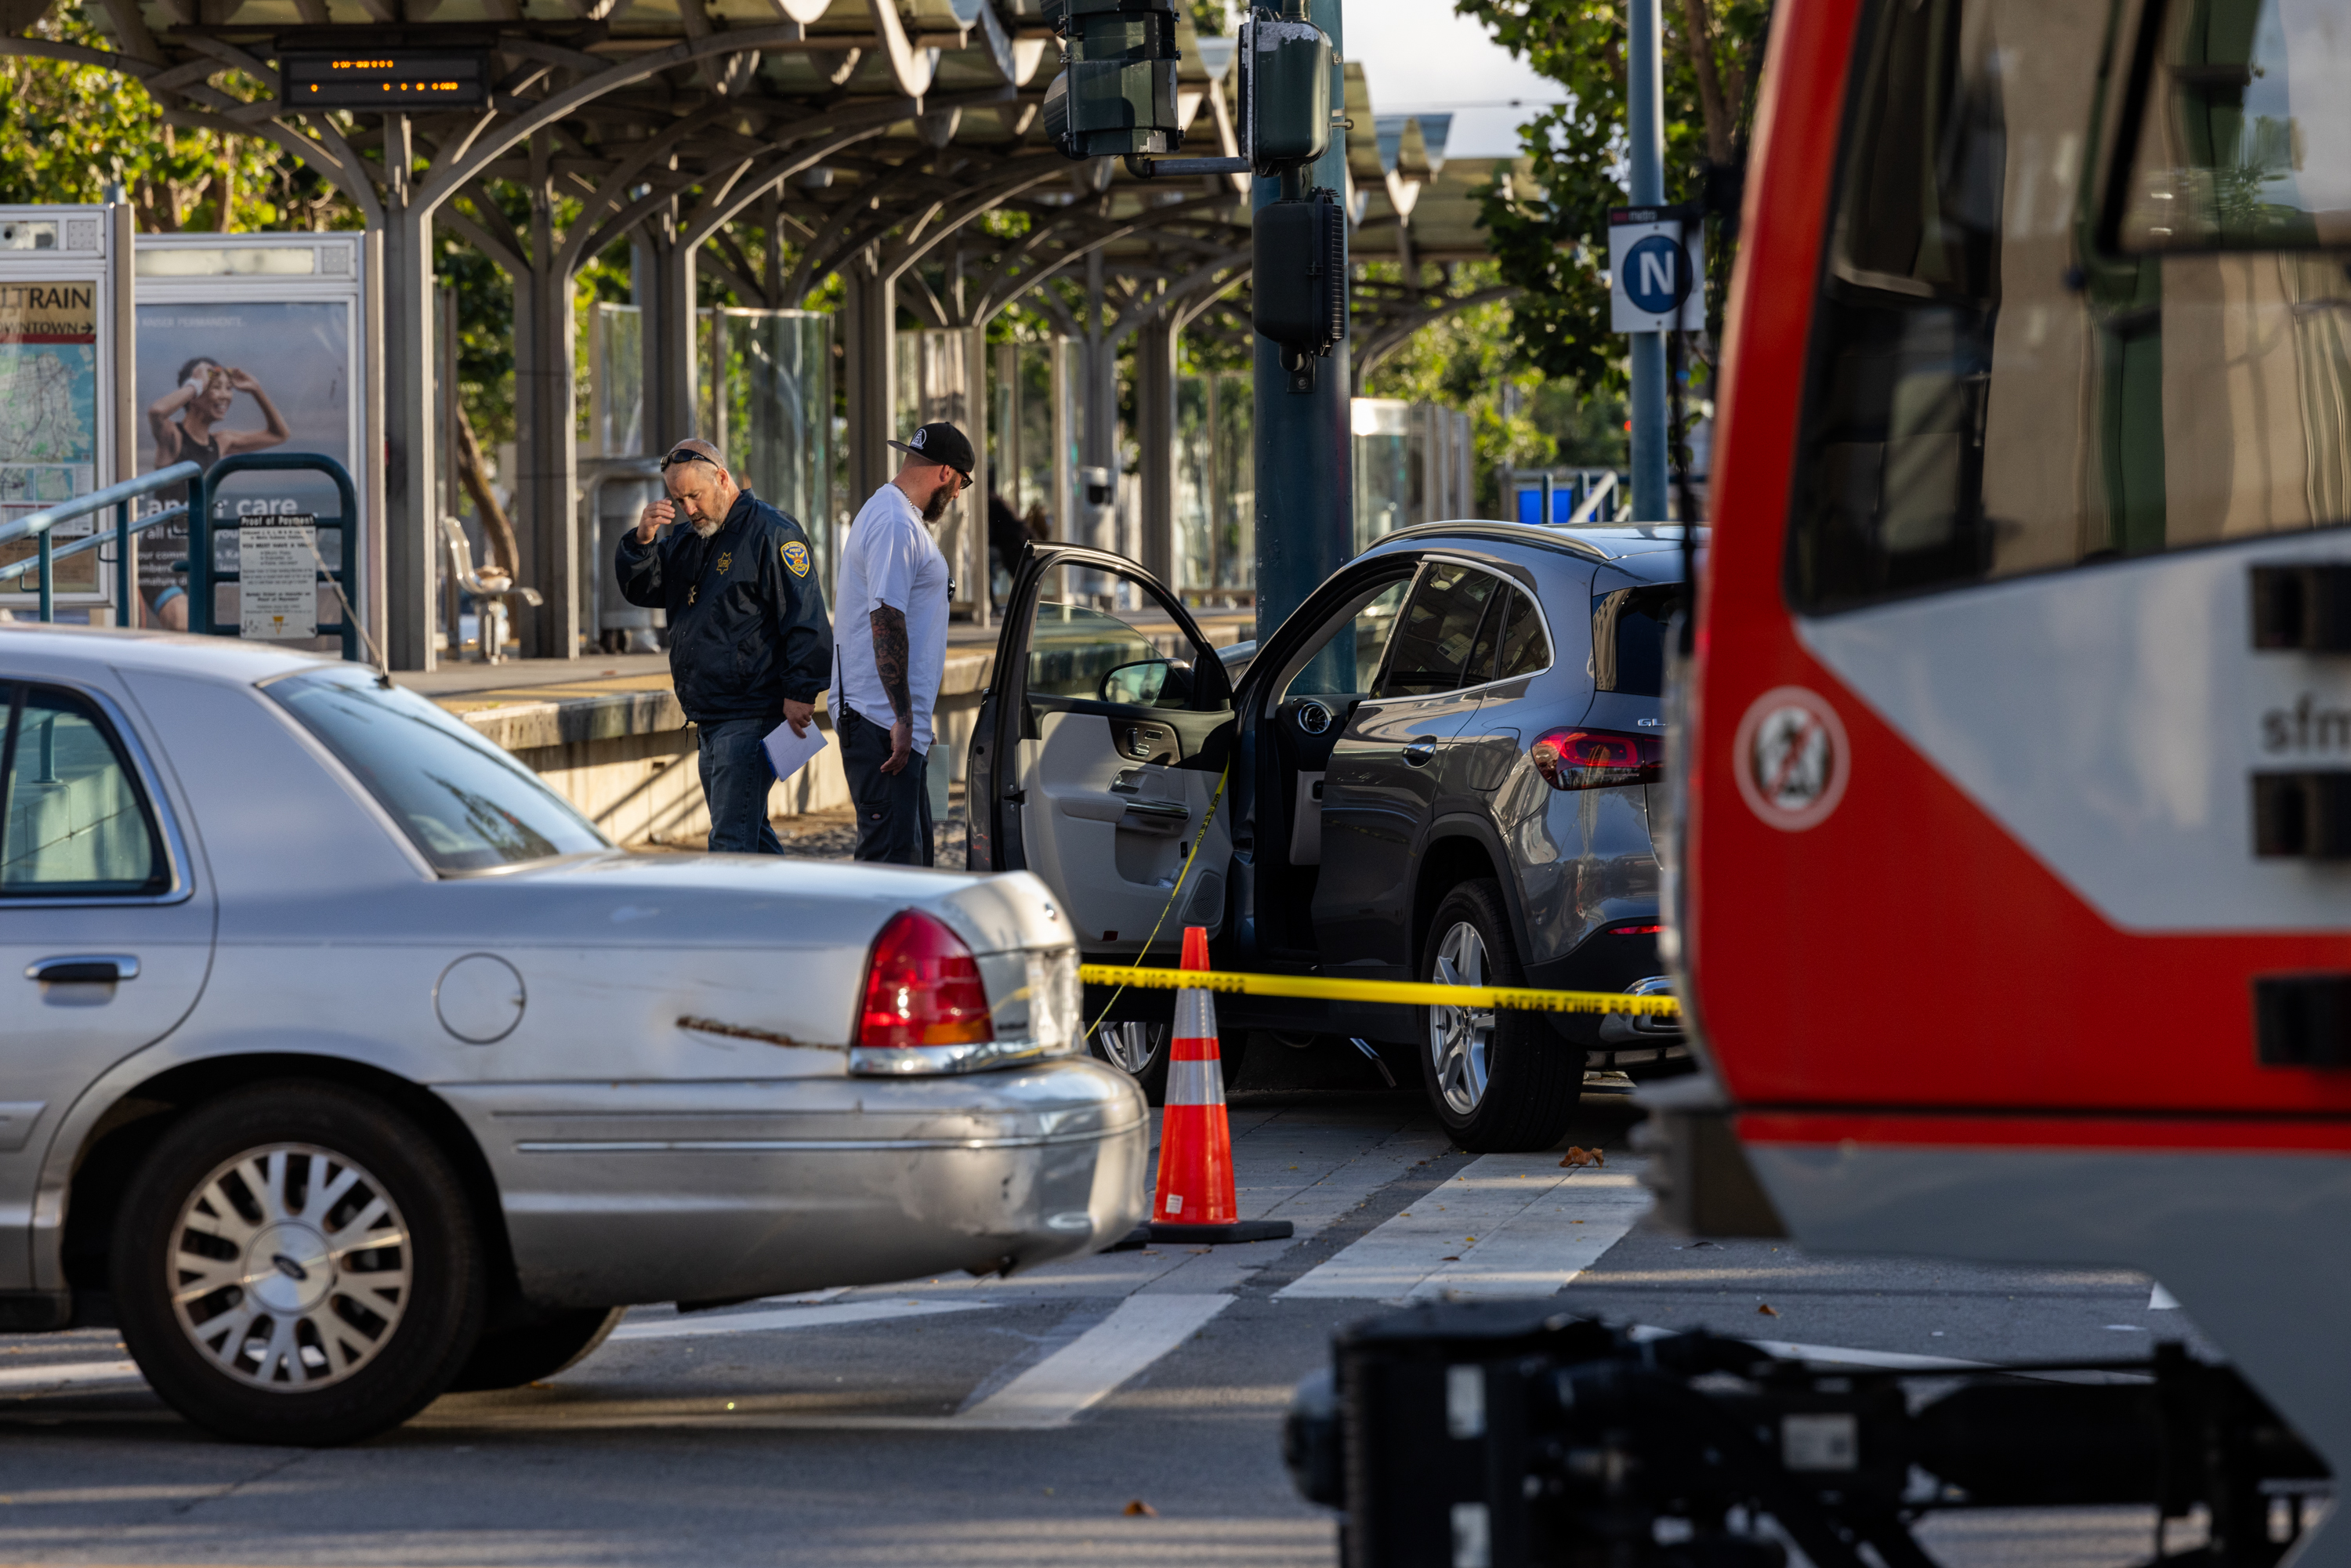 A car crash scene on a city street with police, vehicles, and caution tape.